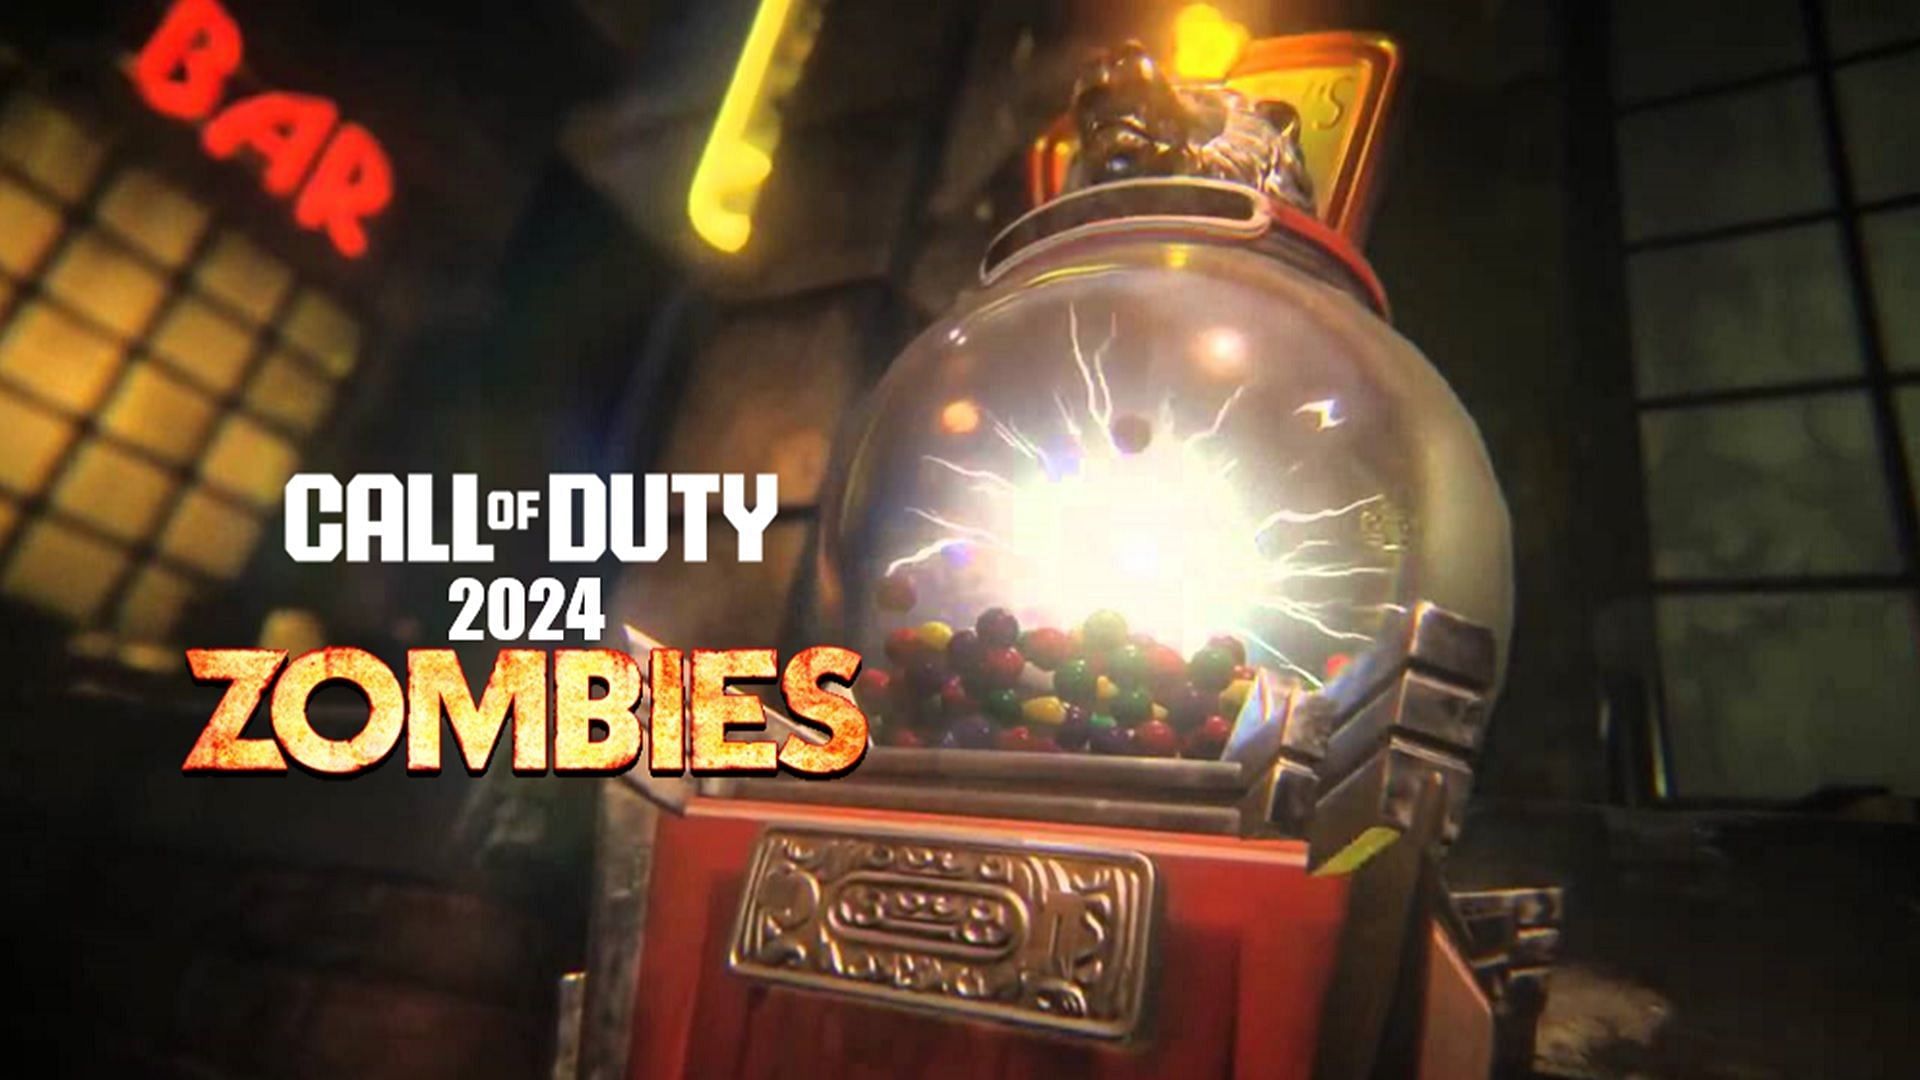 GobbleGums feature from previous Zombies games is rumored to return in CoD 2024 Black Ops 6 Zombies